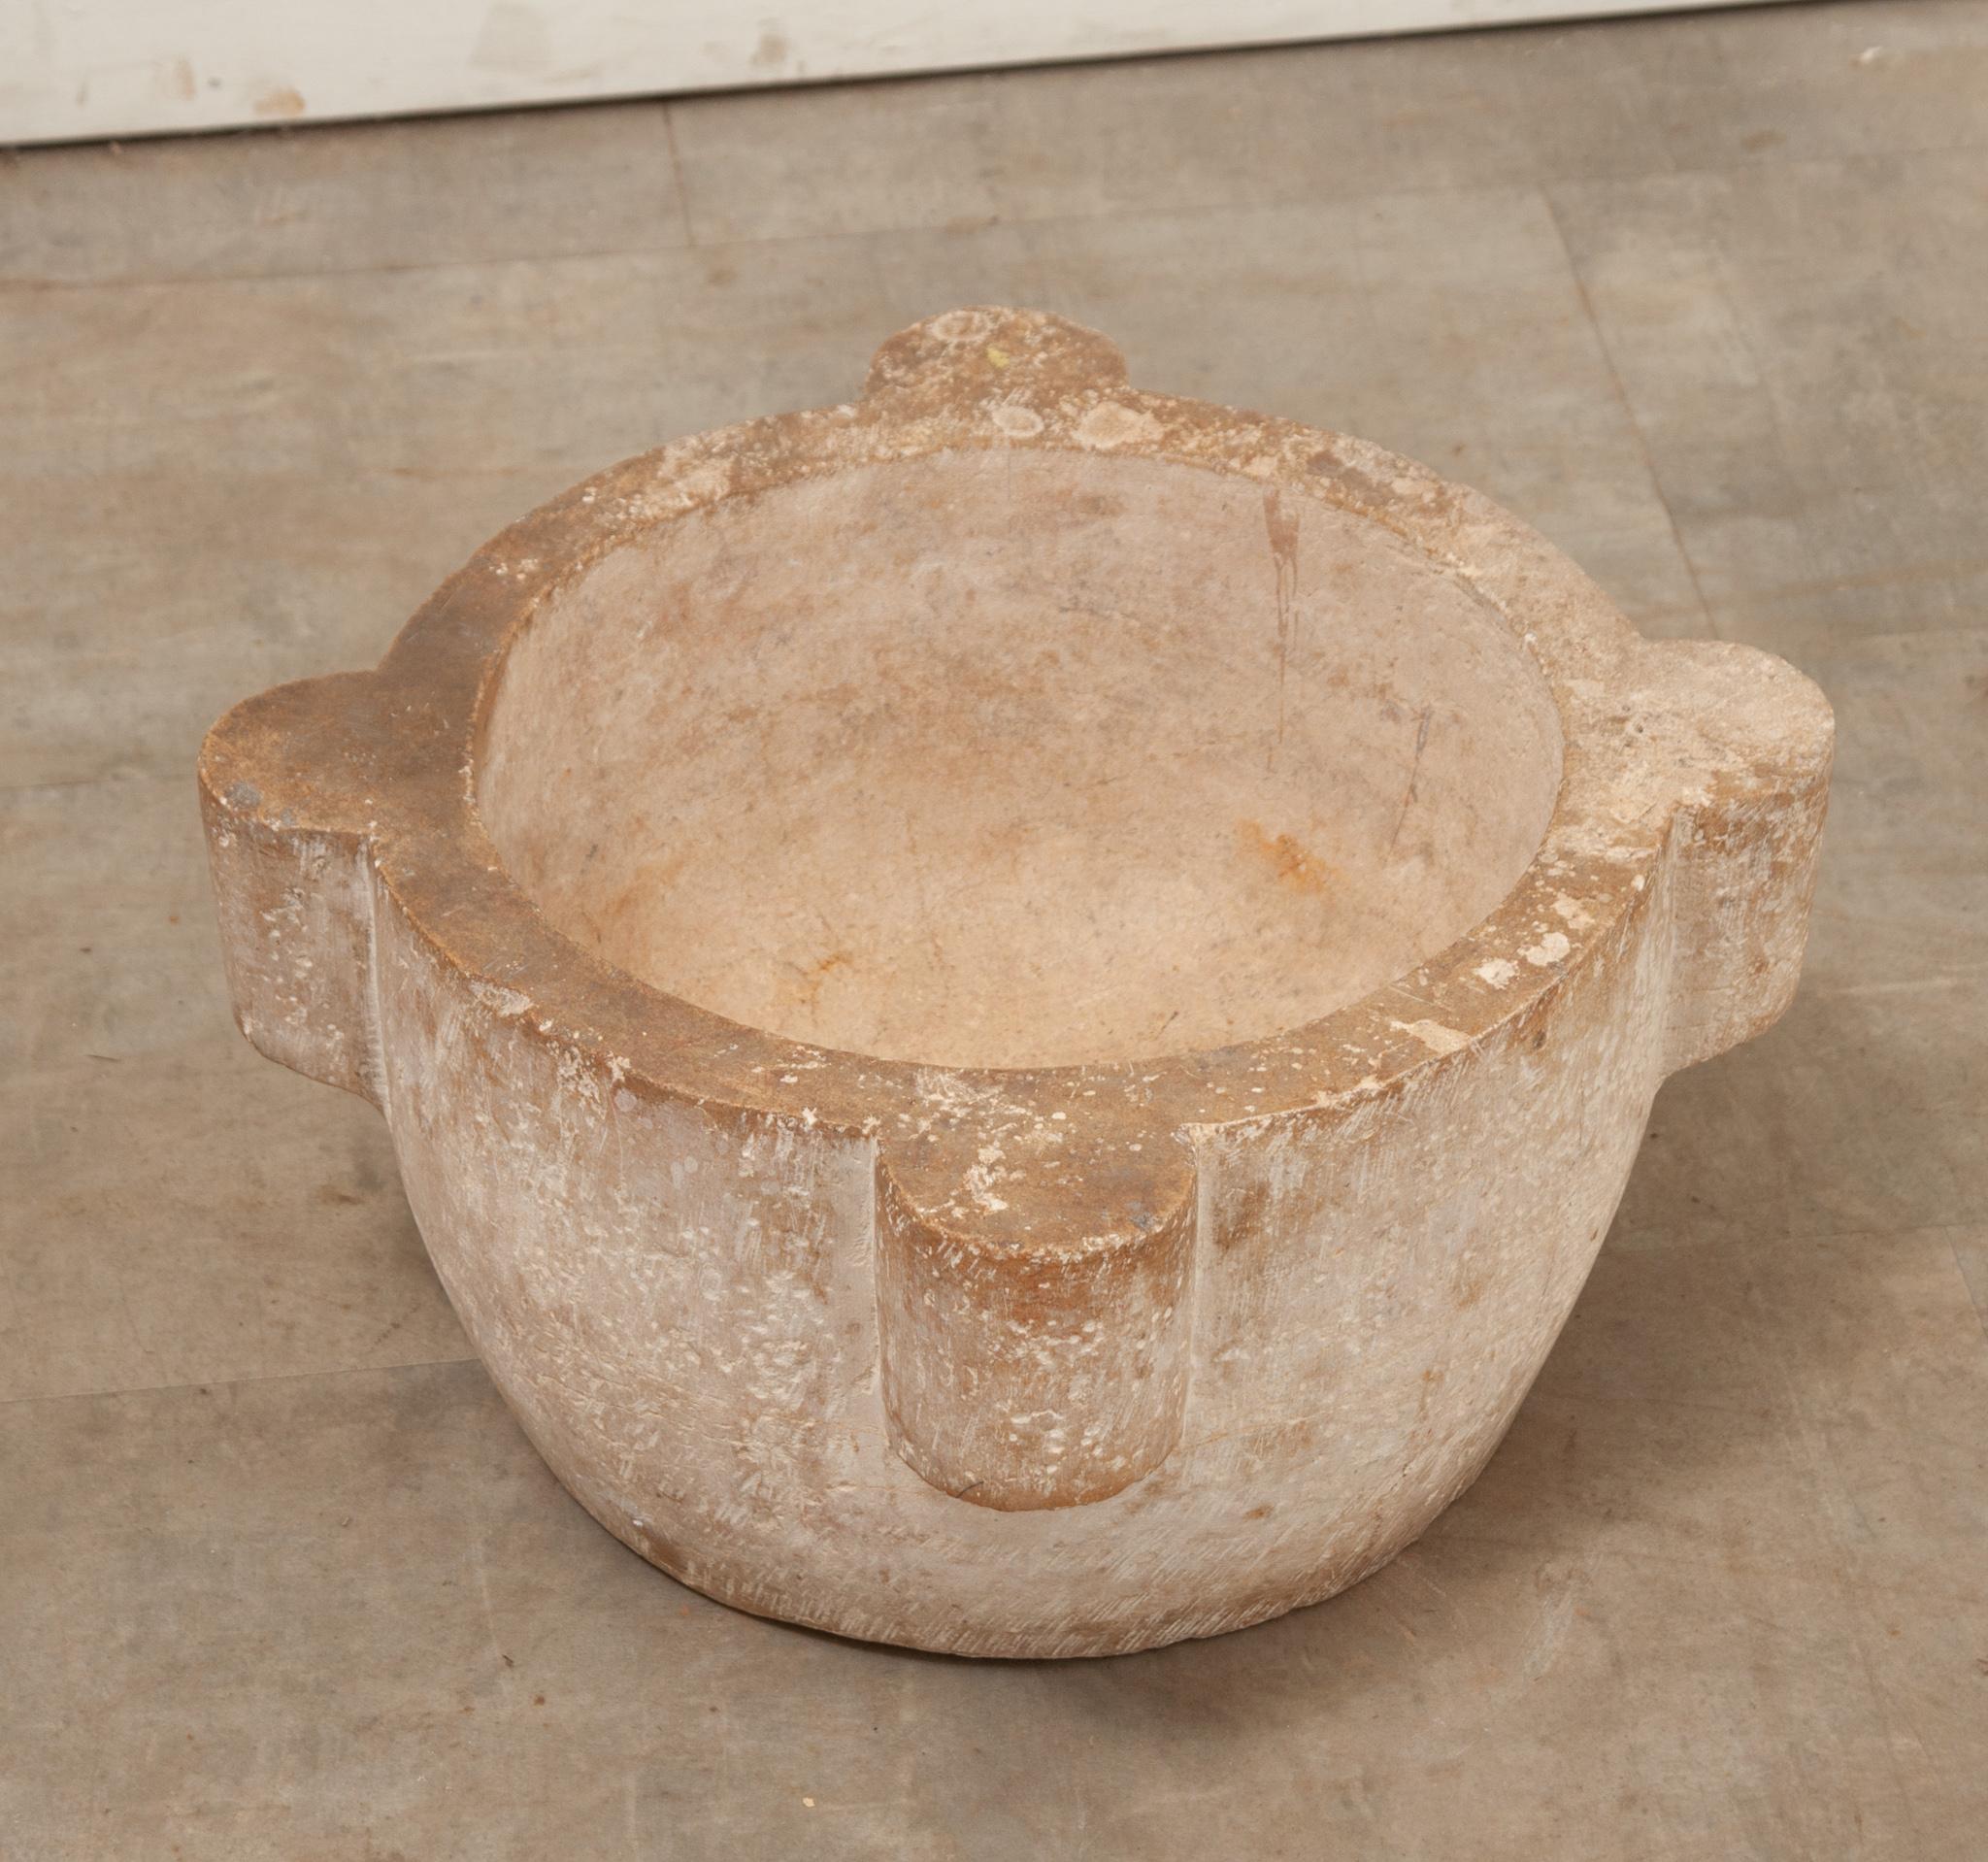 A French stone mortar used to grind herbs and spices. This mortar is hand-chiseled from one piece of stone and has four handles, making it easy to use and carry. Be sure to view the detailed images to see the current condition of this antique mortar.